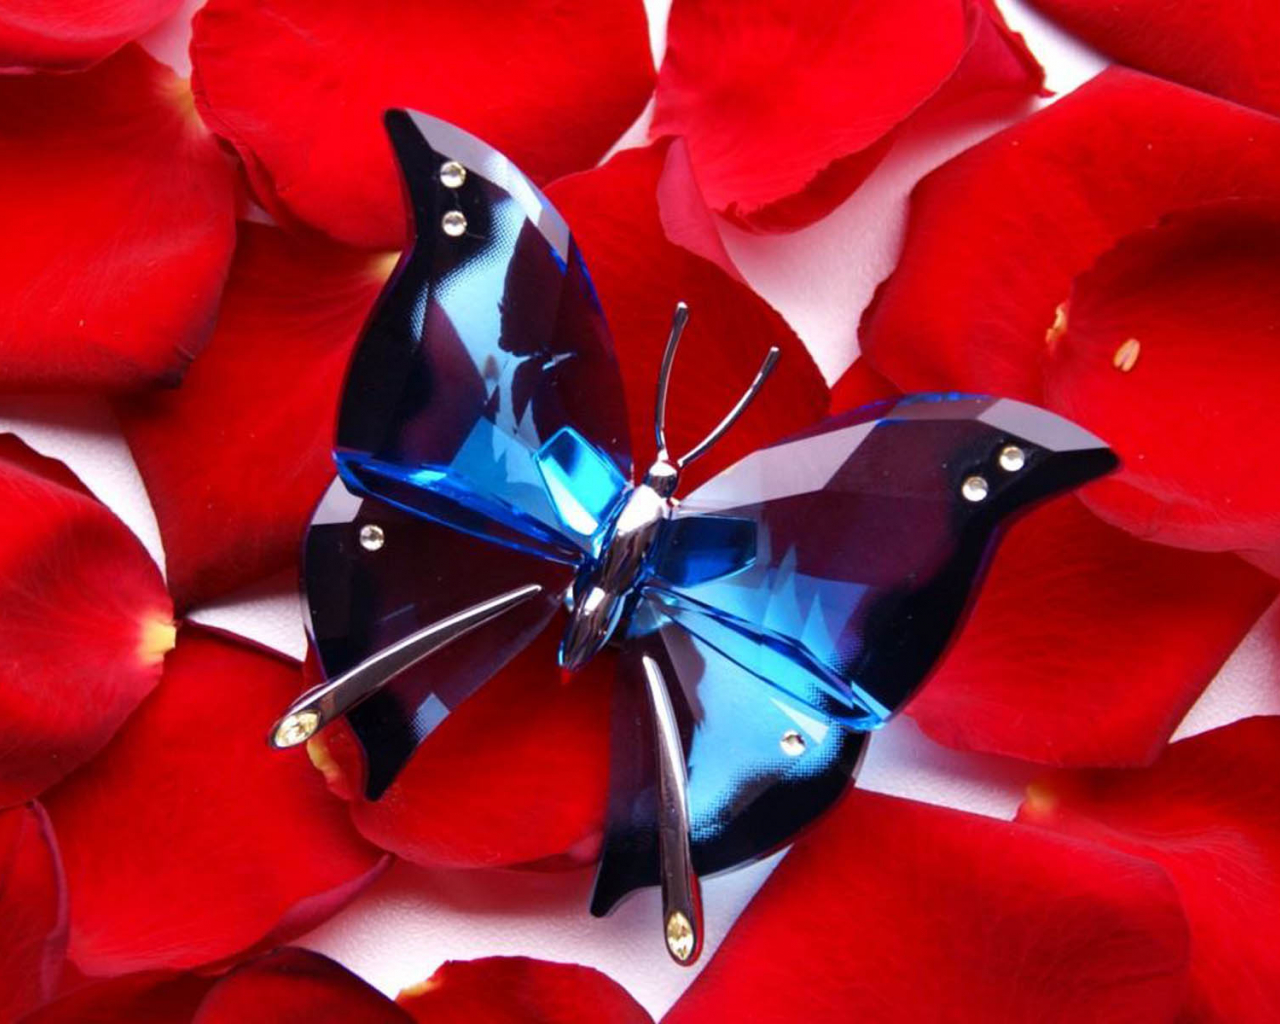 Red Butterfly Wallpapers